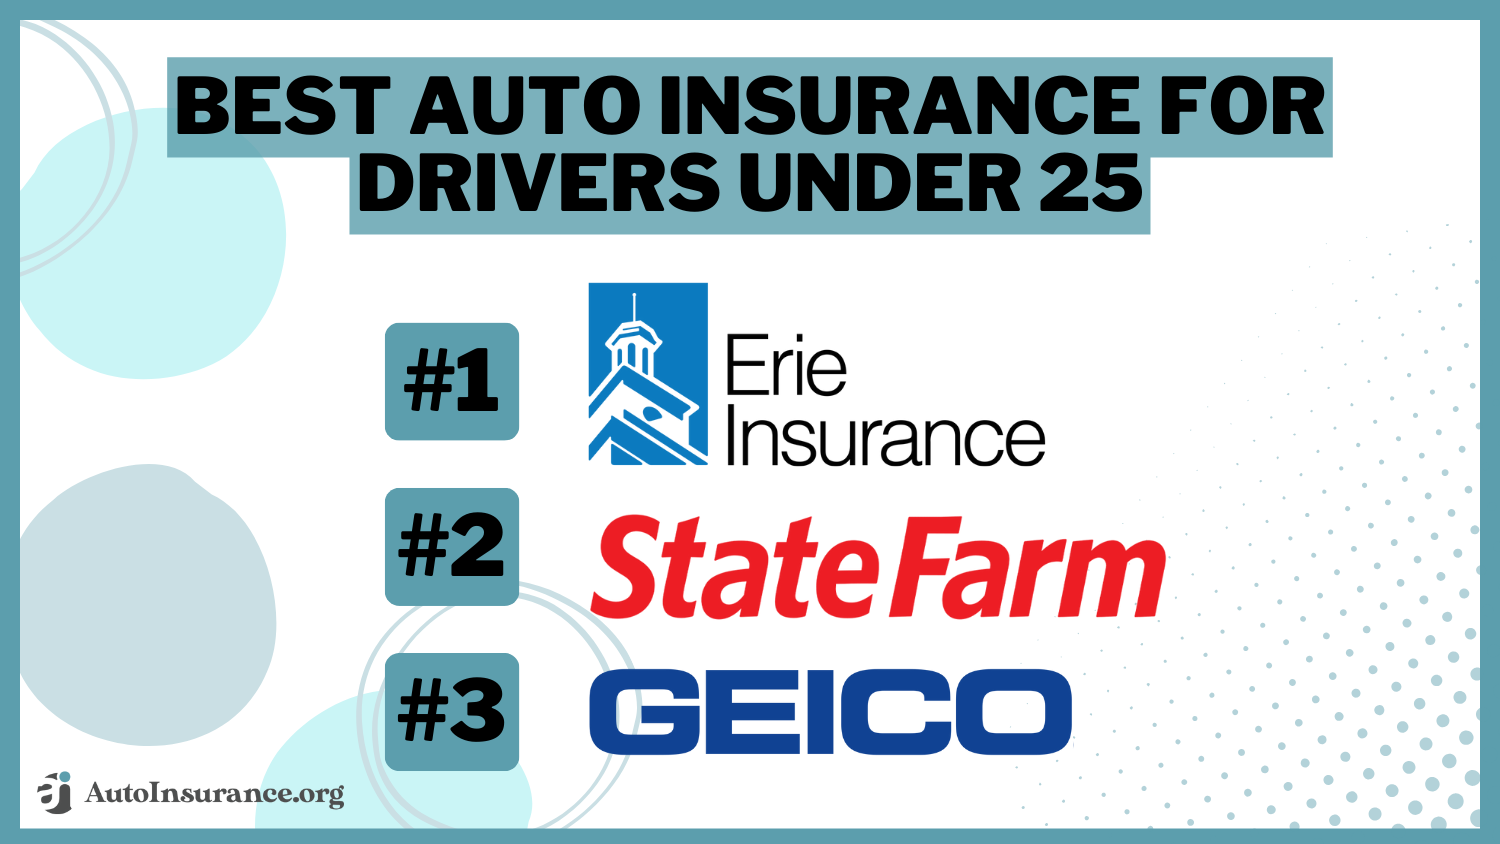 Best Auto Insurance for Drivers Under 25: Erie, State Farm, and Geico